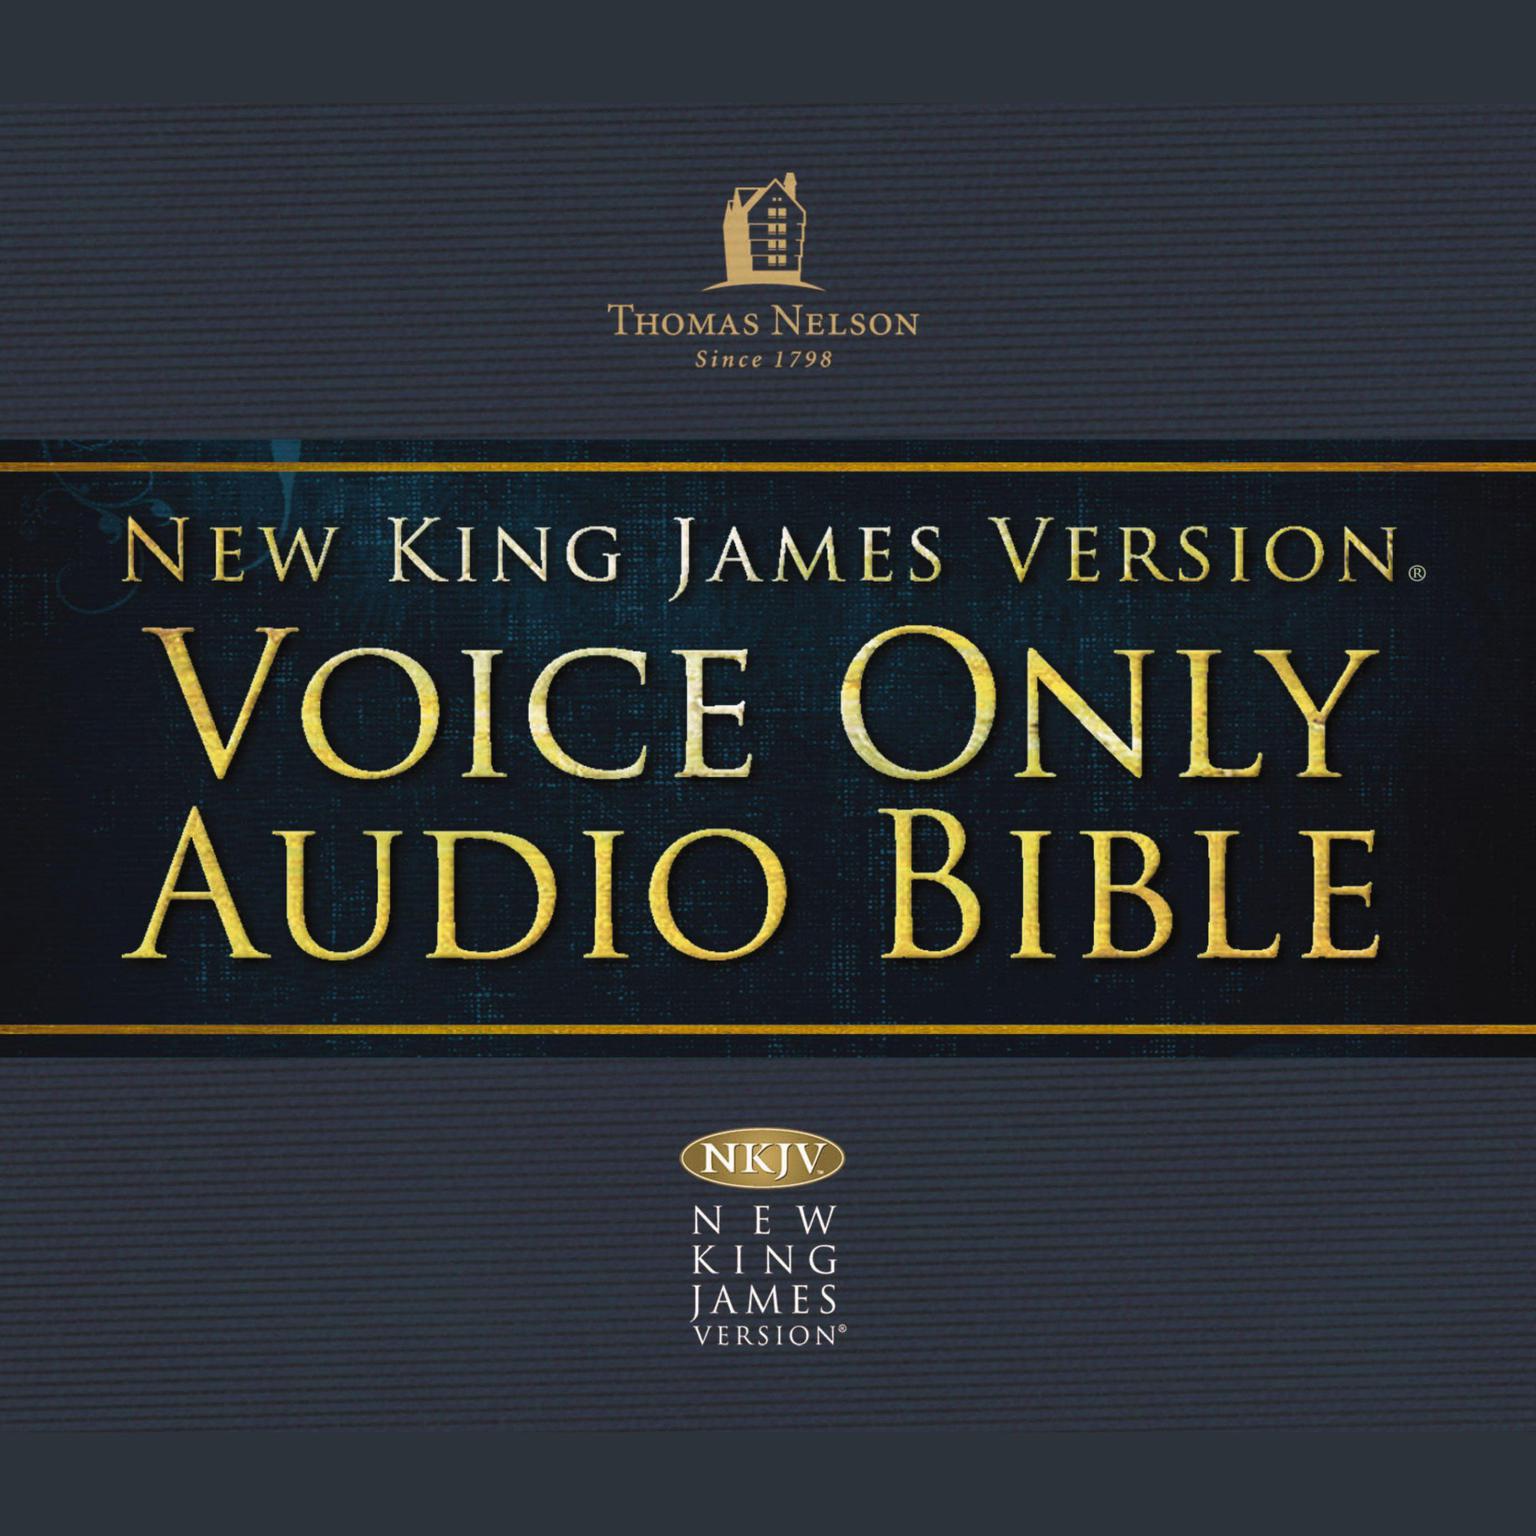 Voice Only Audio Bible - New King James Version, NKJV (Narrated by Bob Souer): (06) Joshua: Holy Bible, New King James Version Audiobook, by Thomas Nelson